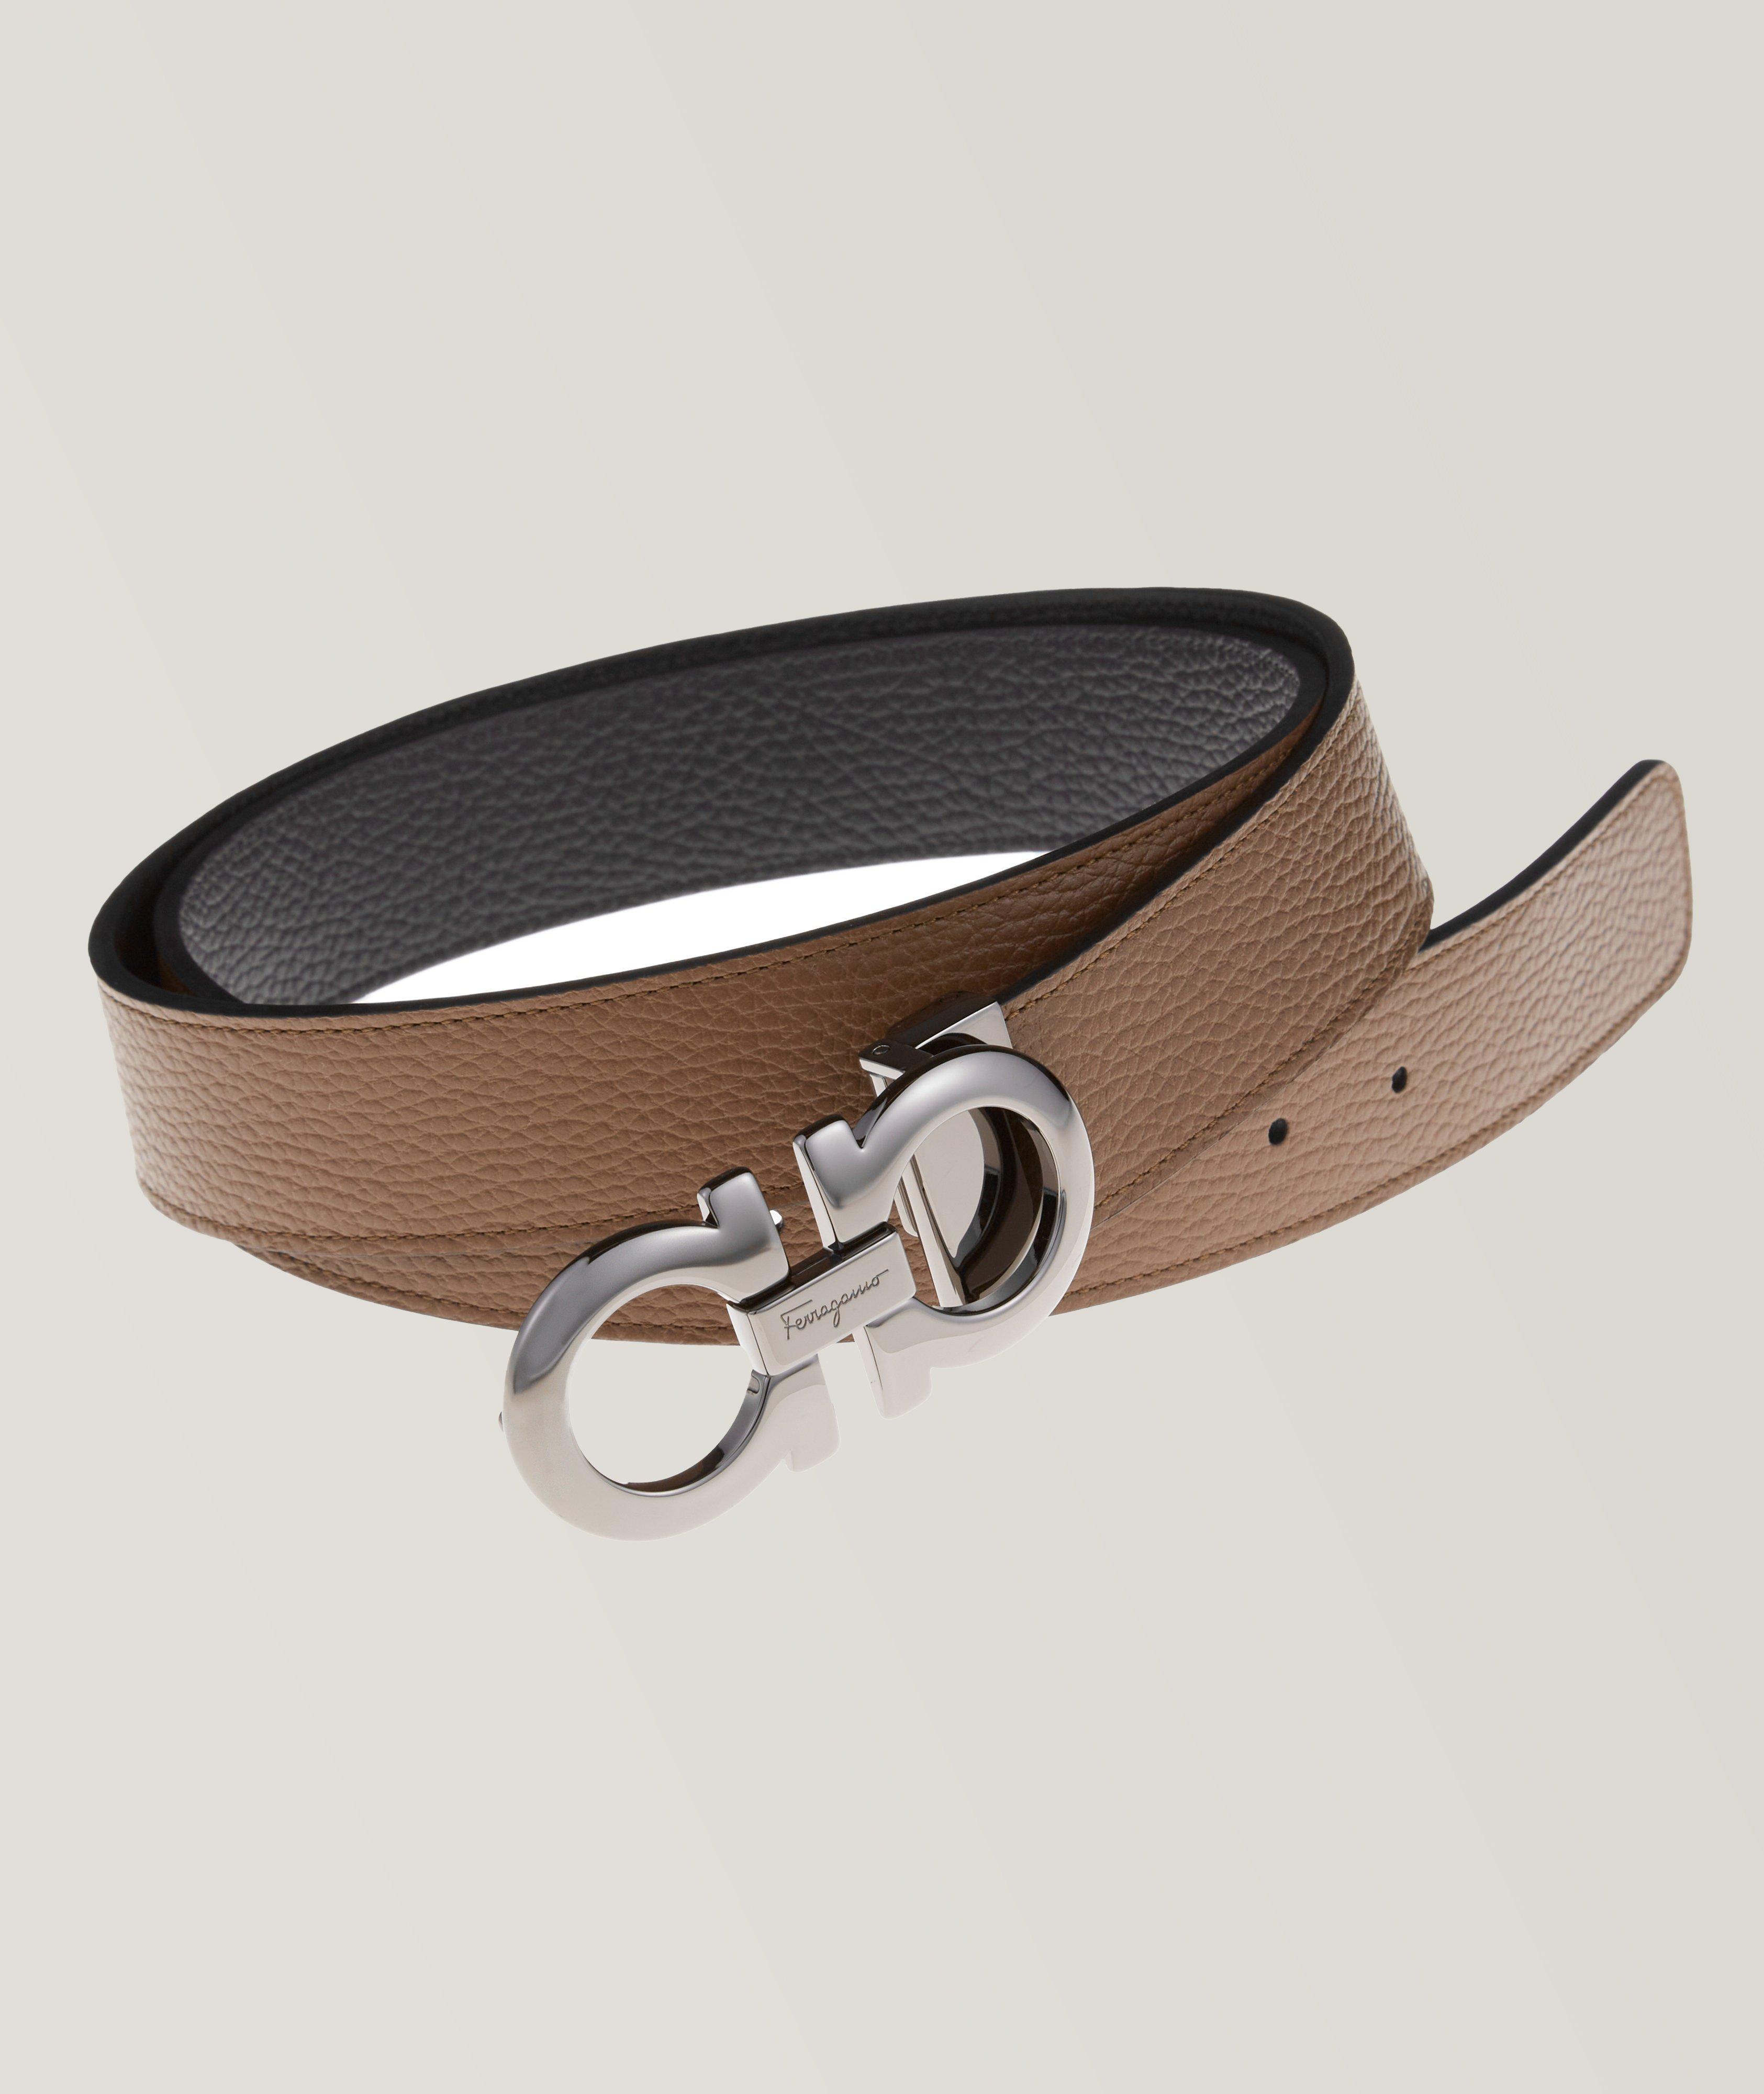 Pebble Grain Leather Dress Belt With Pin Buckle - Black/Brown